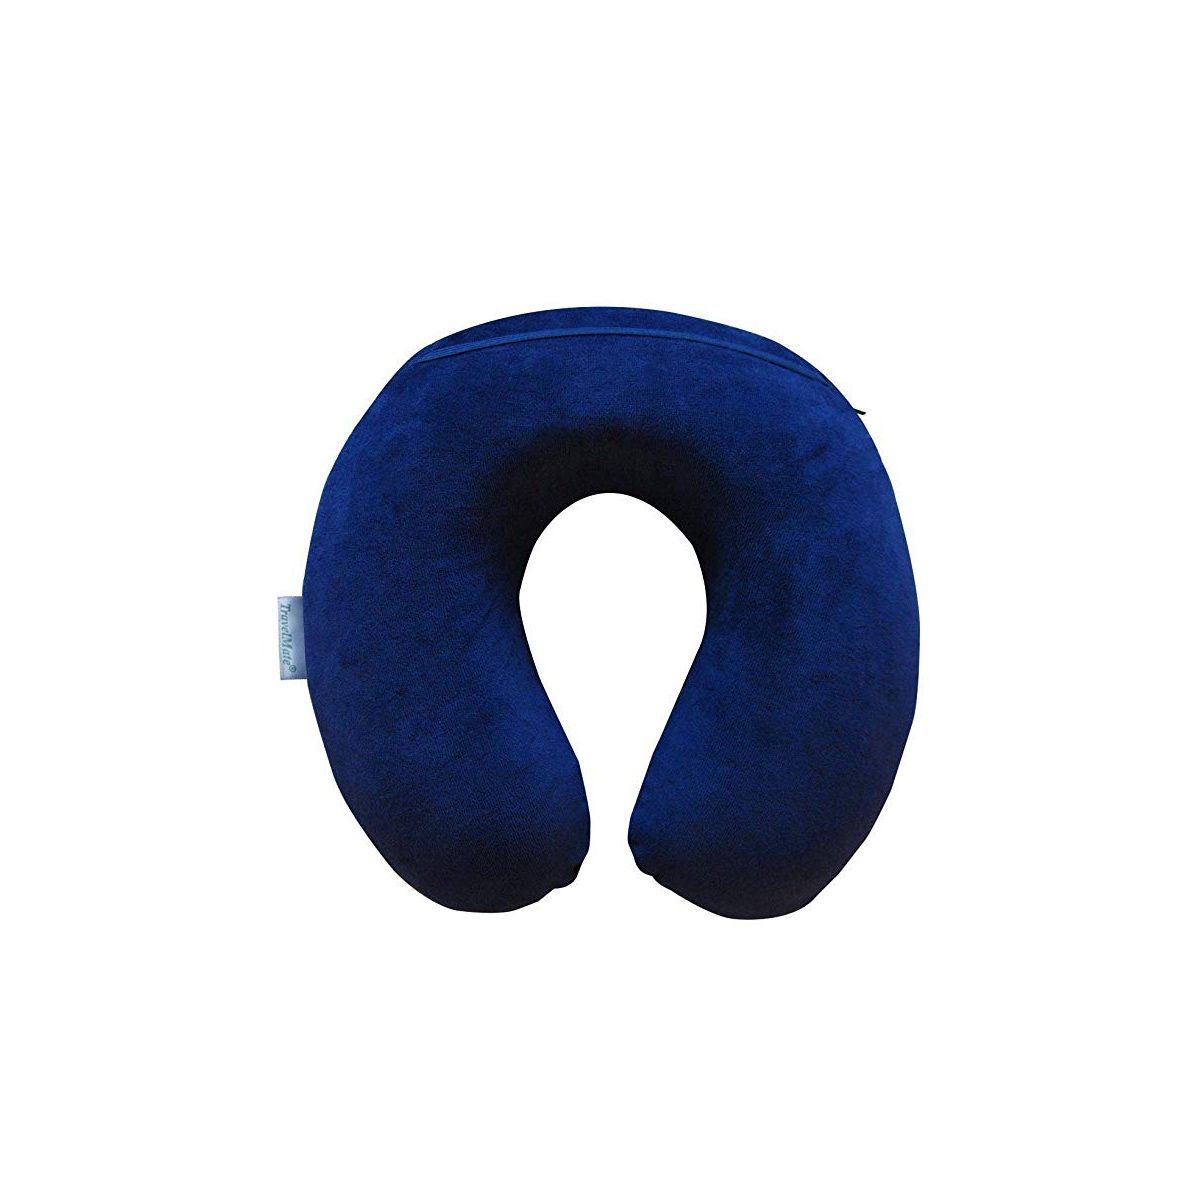 Travelmate Memory Foam Neck Pillow prevent neck pain Great For Airplane Travel 